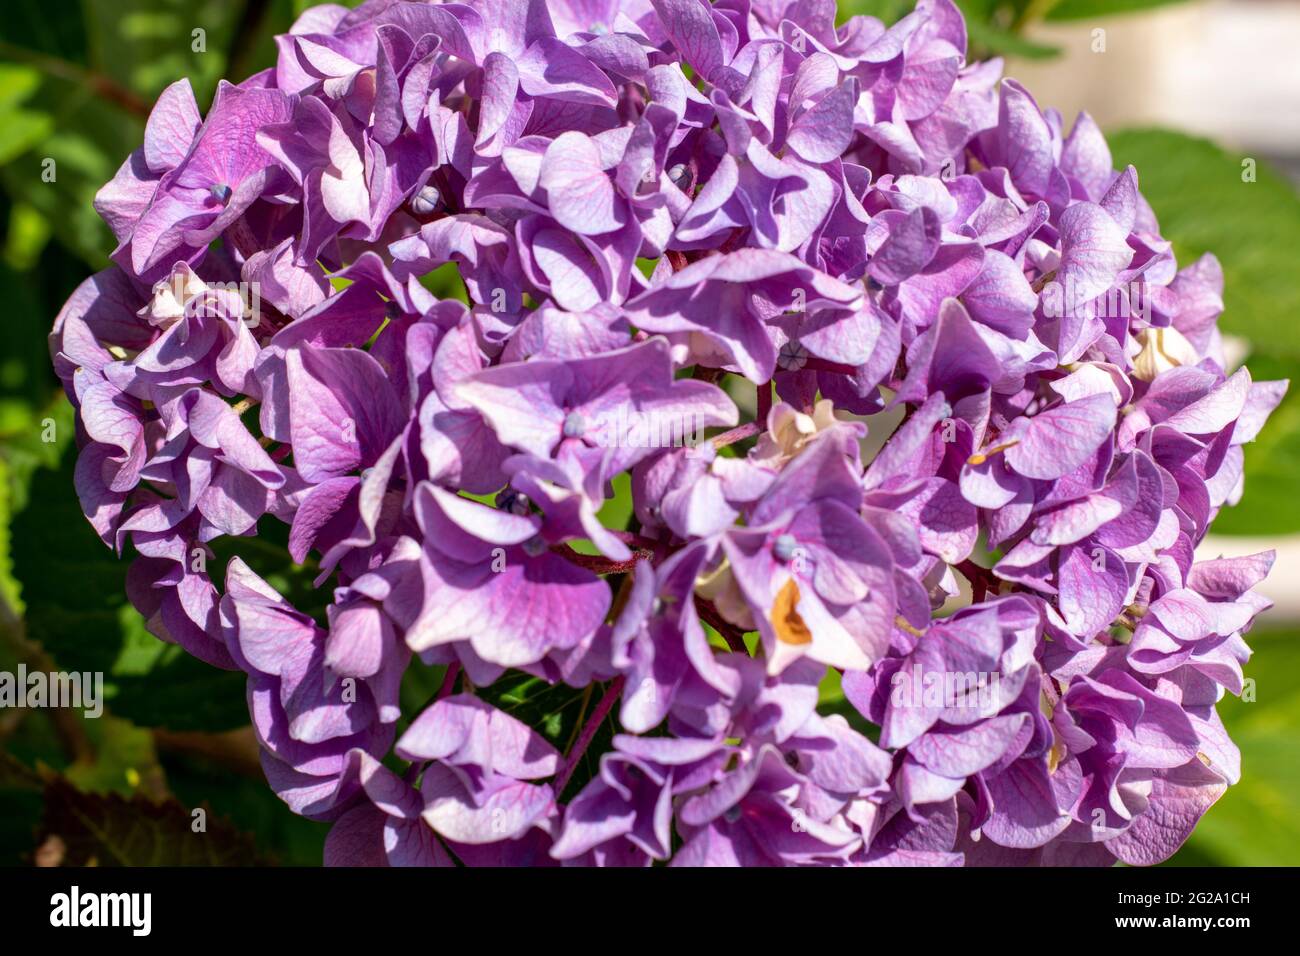 Hydrangea common names hydrangea or hortensia, is a genus of 70–75 species of flowering plants native to Asia and the Americas. Colors of nature. Stock Photo